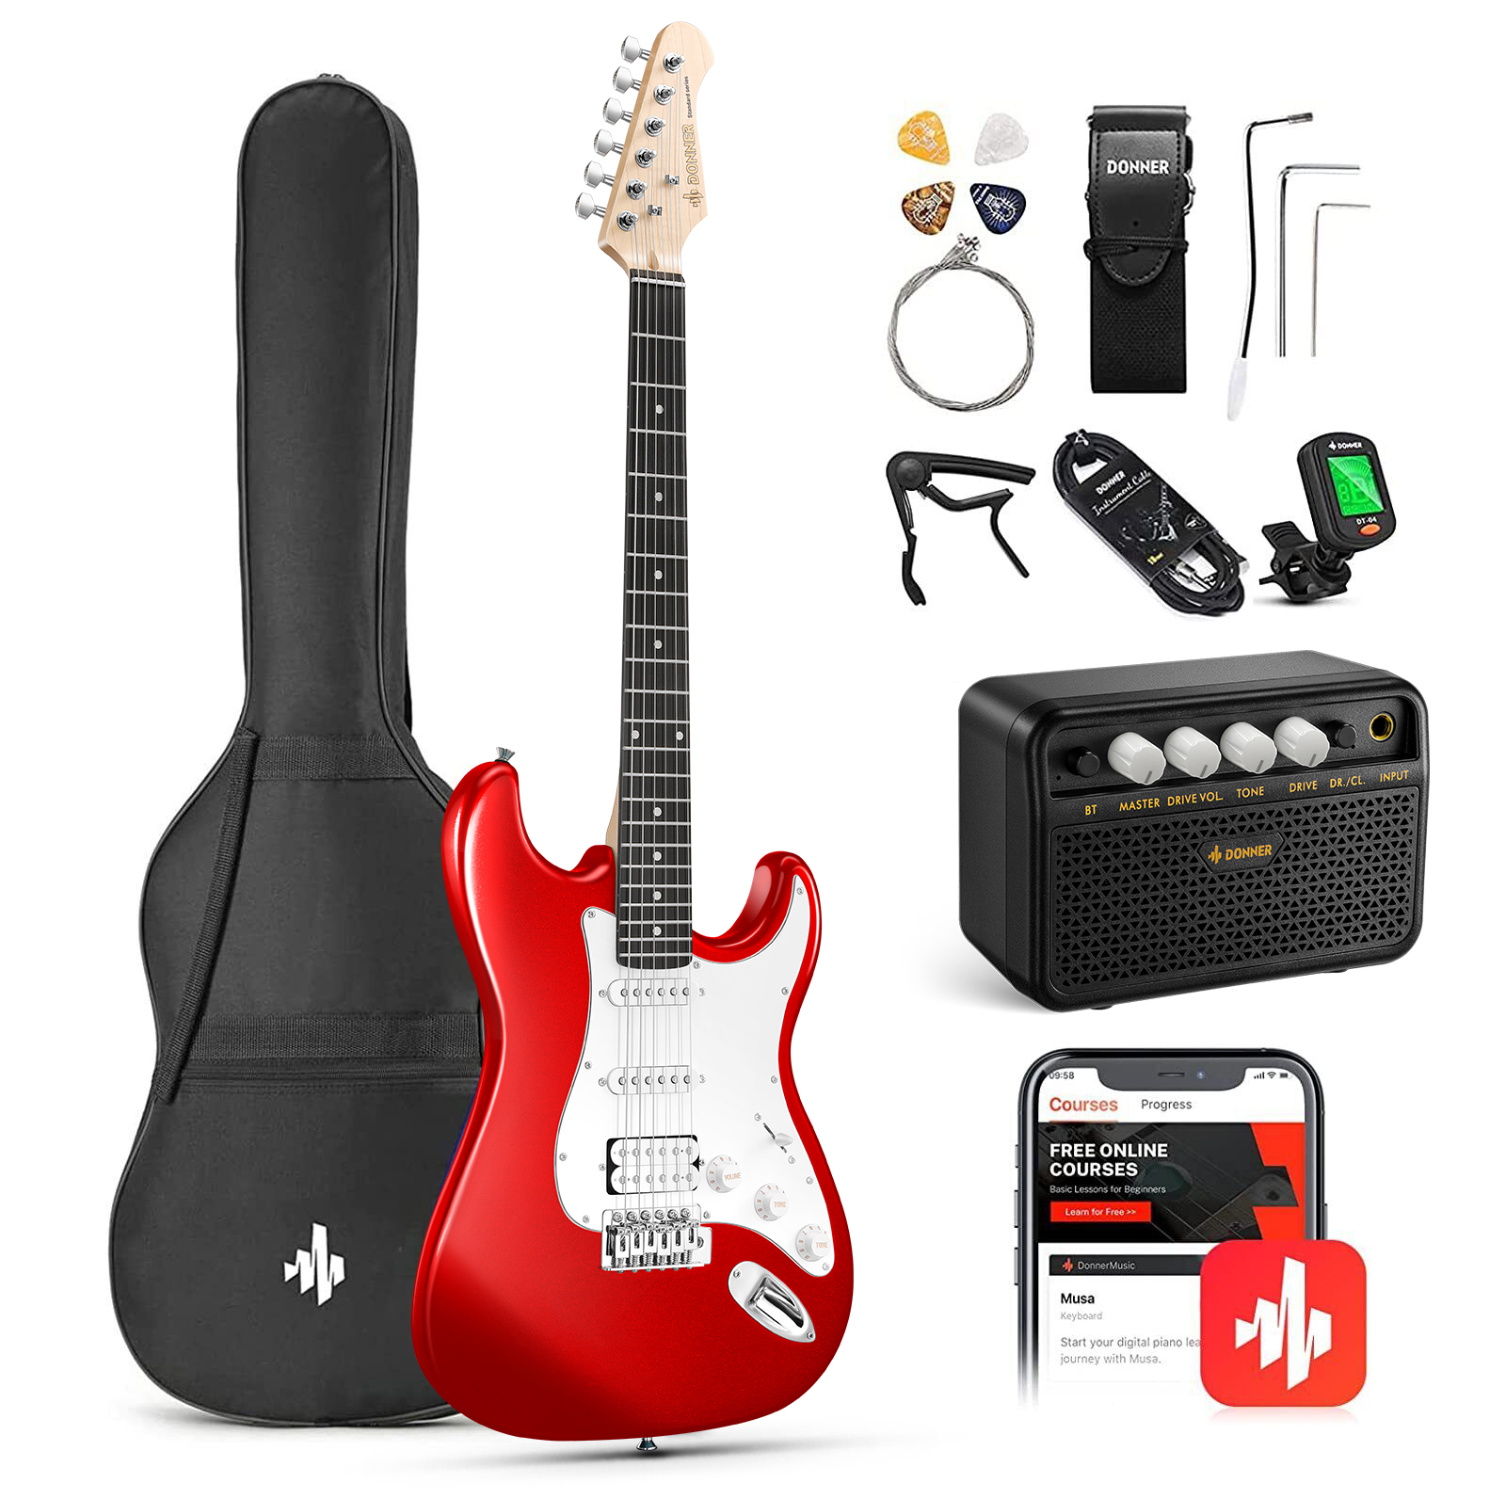 Donner 39" Electric Guitar Beginner Kit Solid Body Full Size Red HSS Pick Up for Starter, with Amplifier, Bag, Digital Tuner, Capo, Strap, String,Cable, Picks DST-102R - image 1 of 13